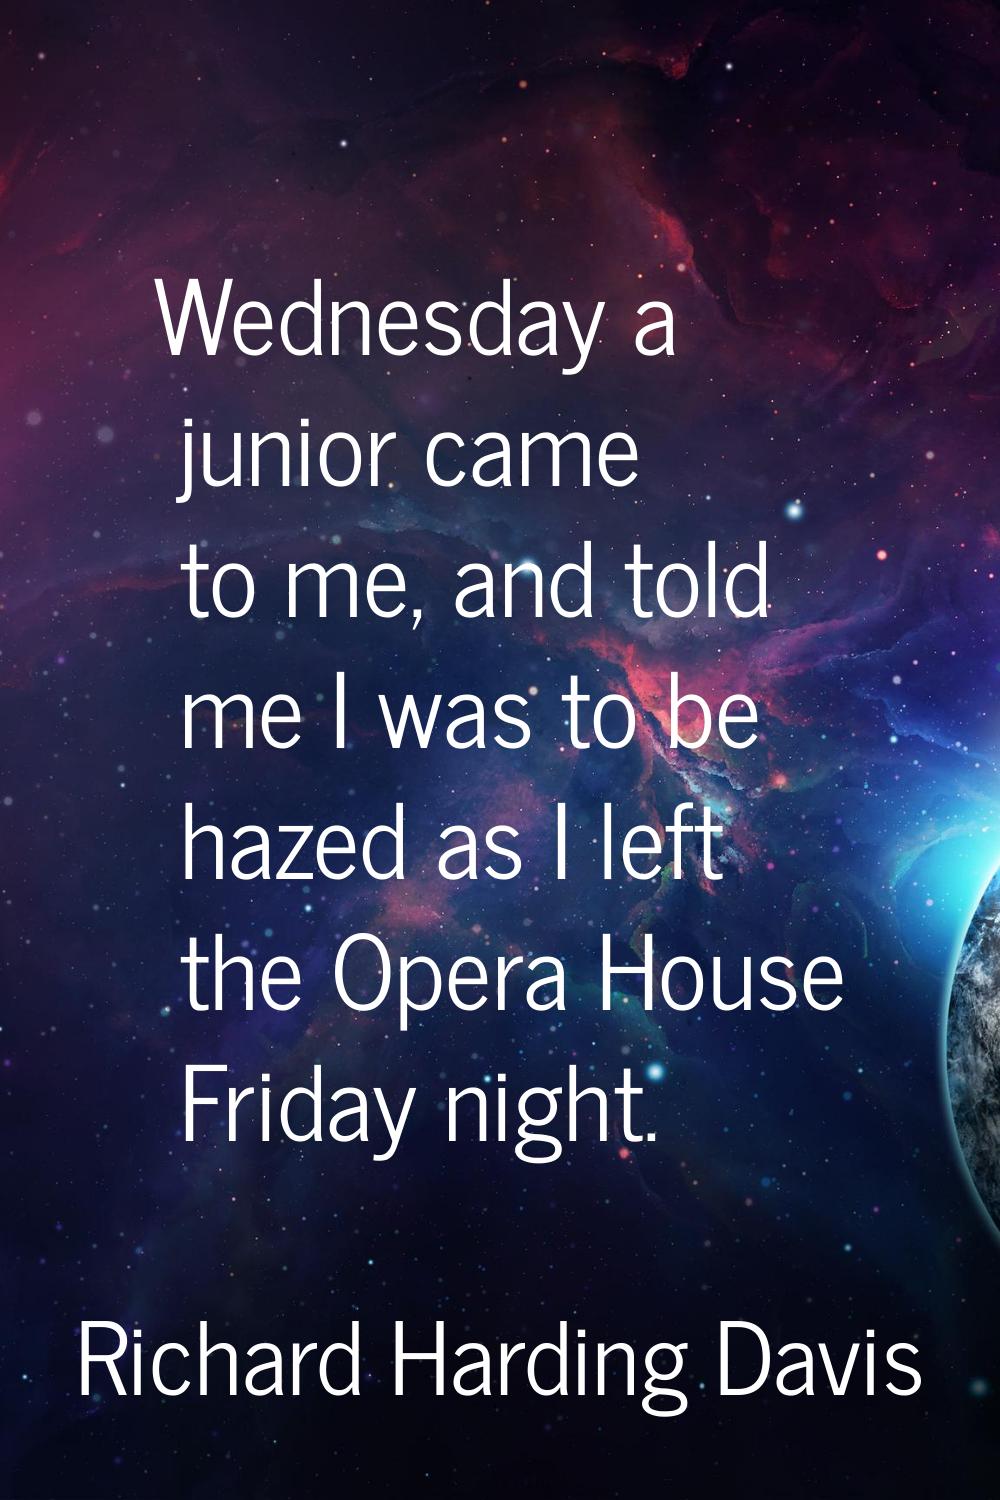 Wednesday a junior came to me, and told me I was to be hazed as I left the Opera House Friday night